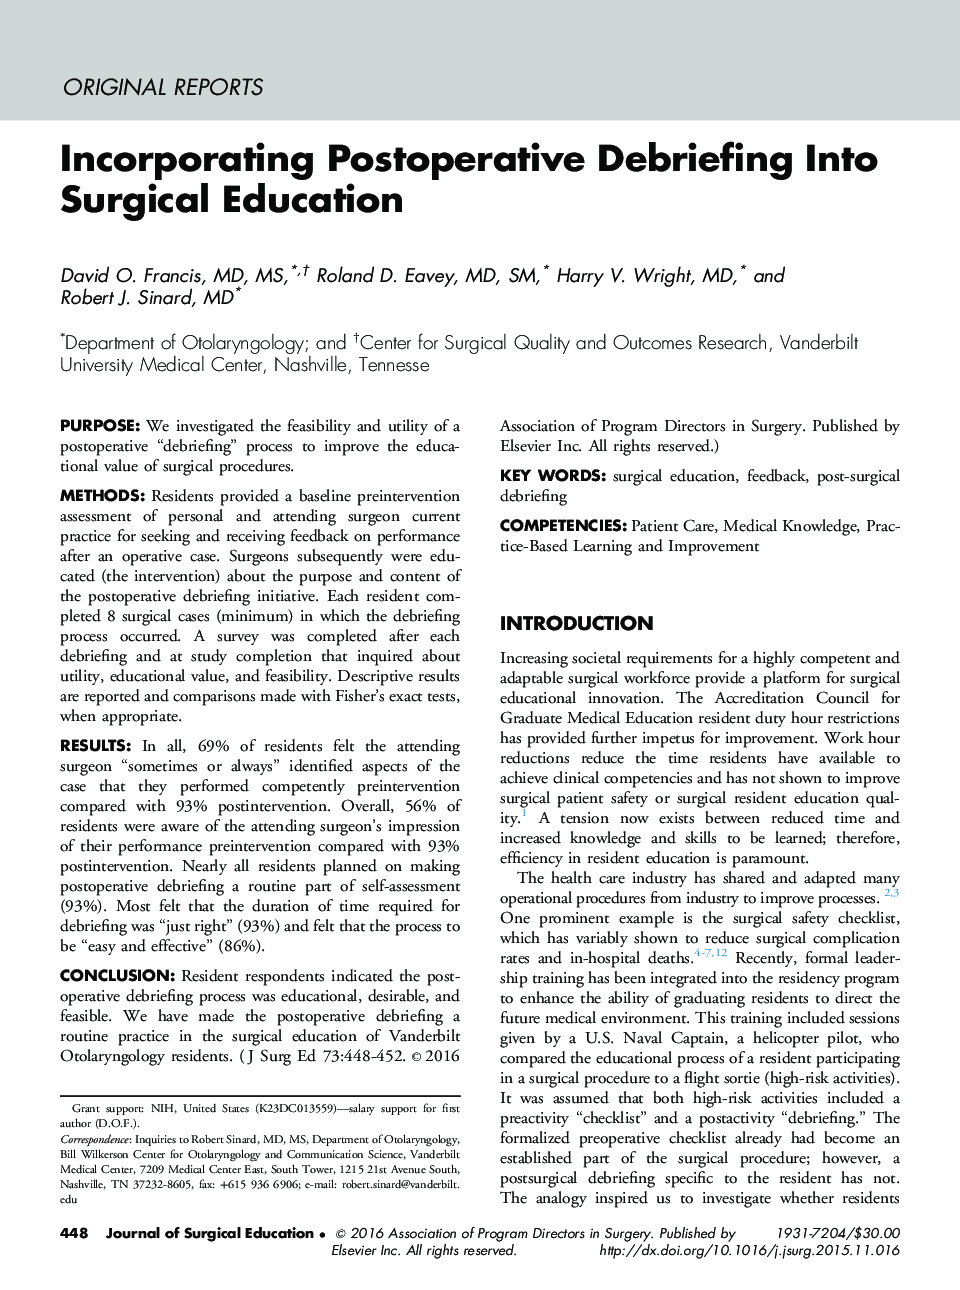 Incorporating Postoperative Debriefing Into Surgical Education